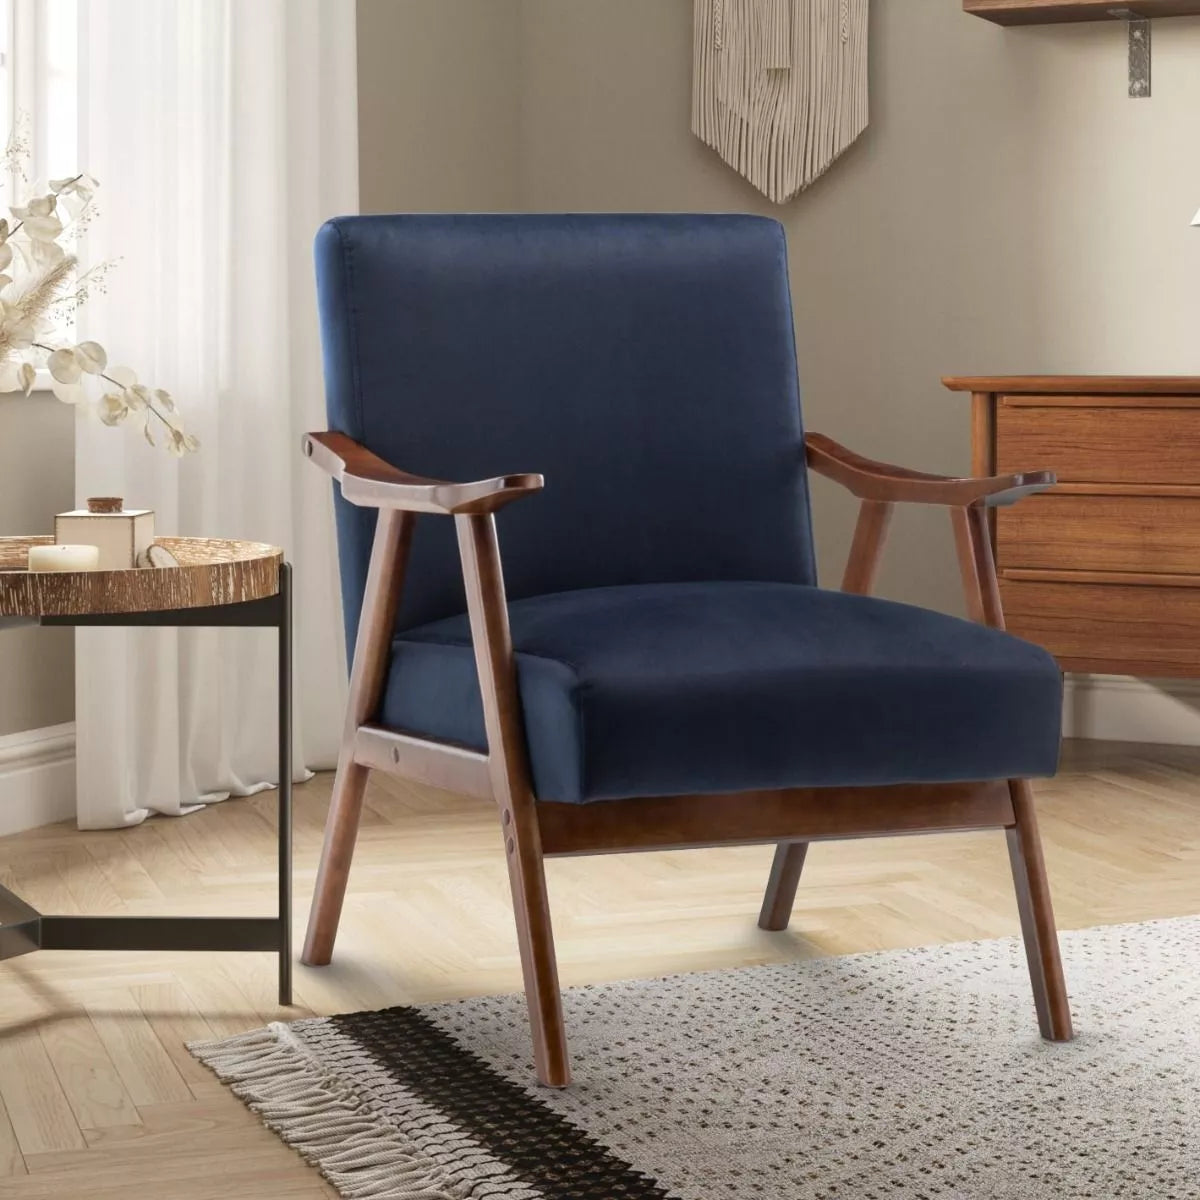 A Navy Blue Velvet Selma chair from Stunning Chairs, pictured on a scandinavian-inspired background